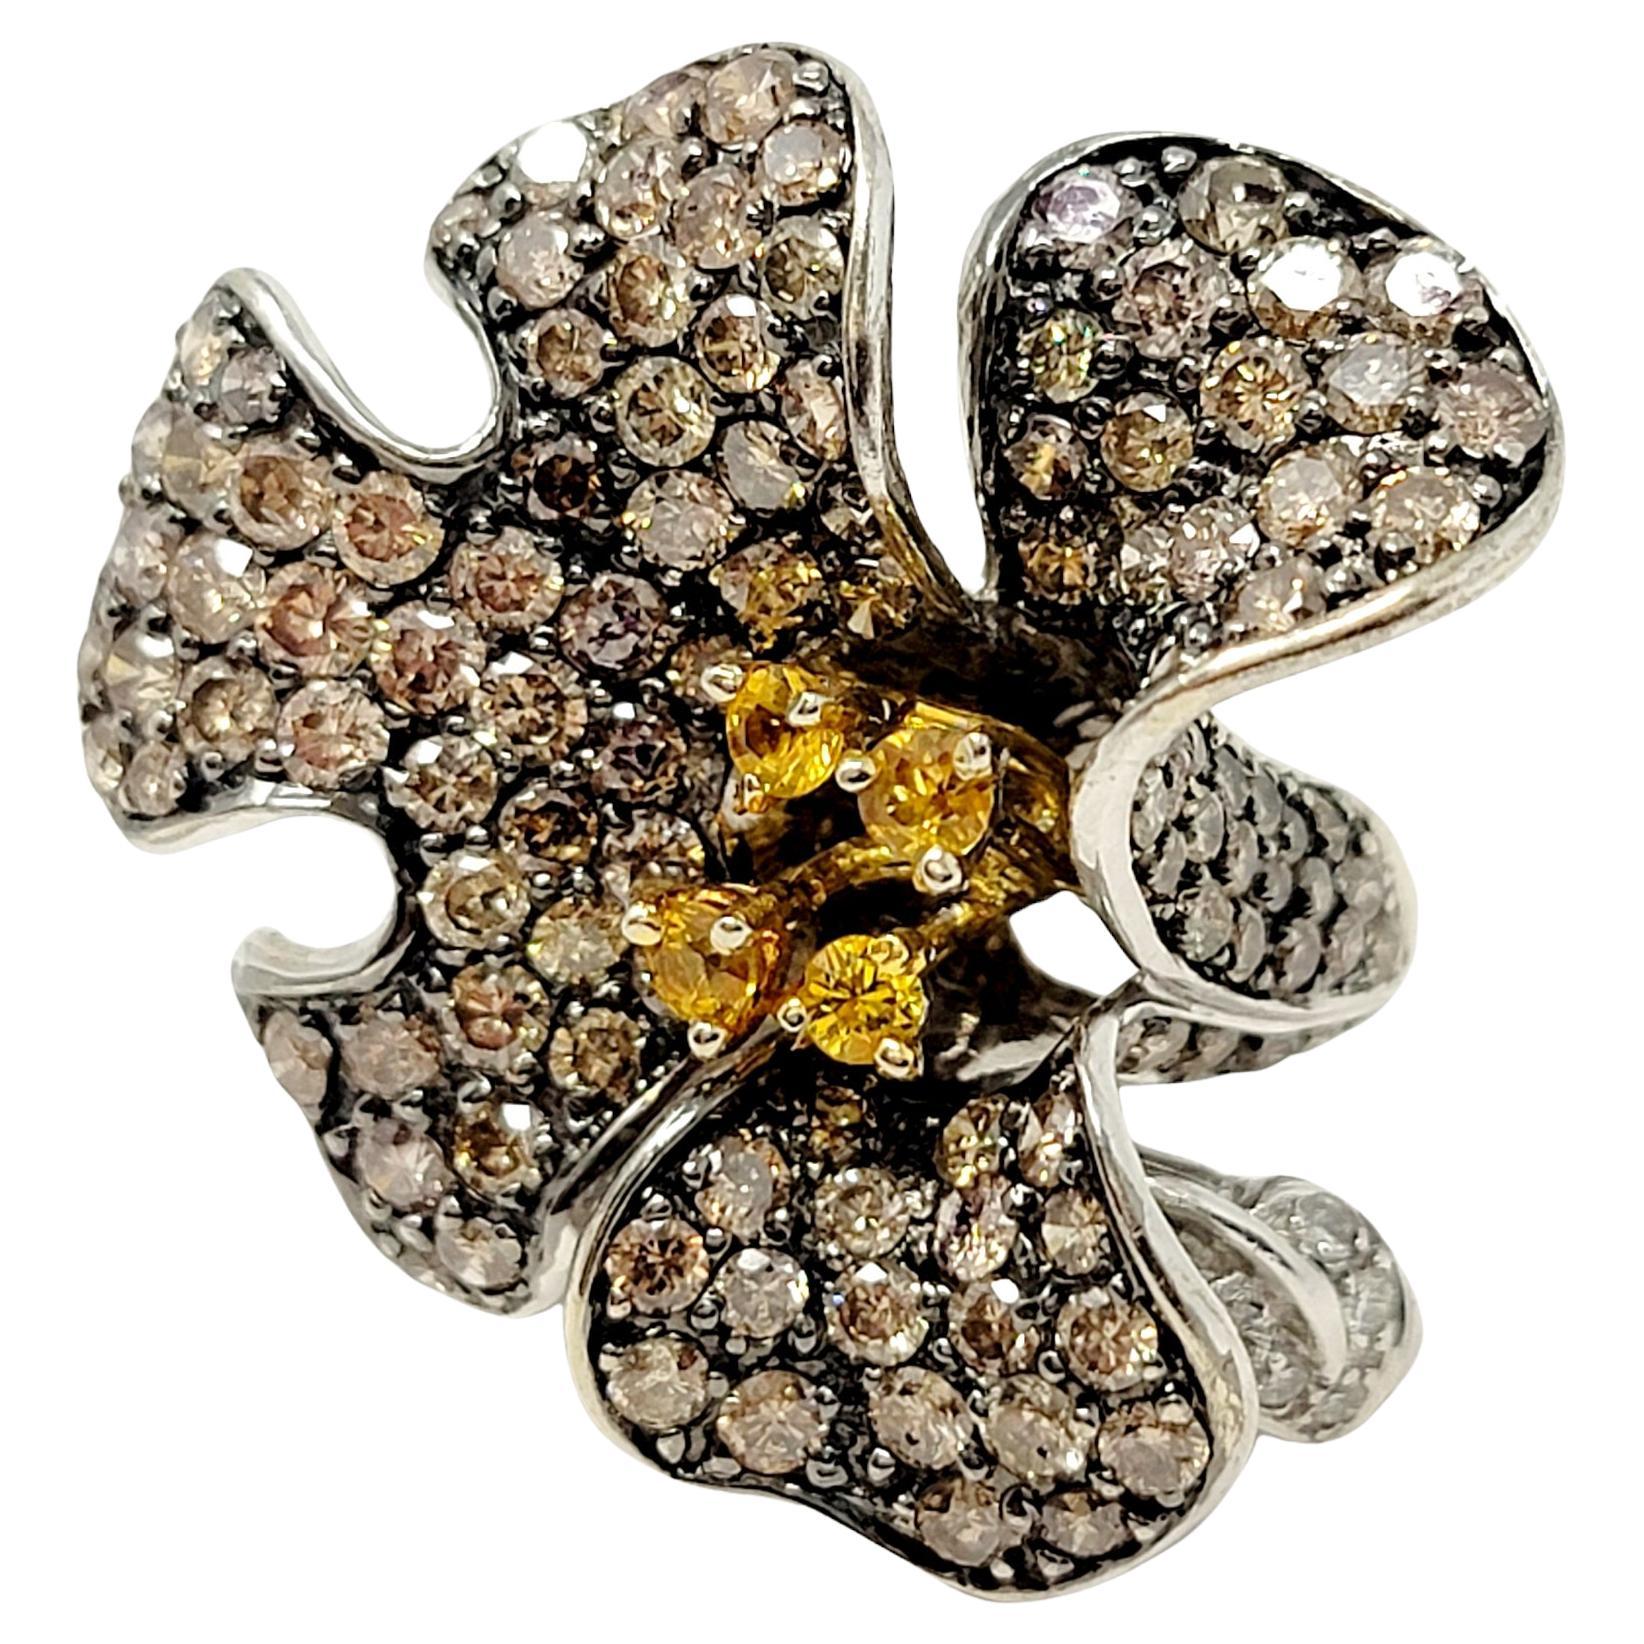 3D Pave Diamond Orchid Flower Ring with Orange Sapphire Accents in White Gold